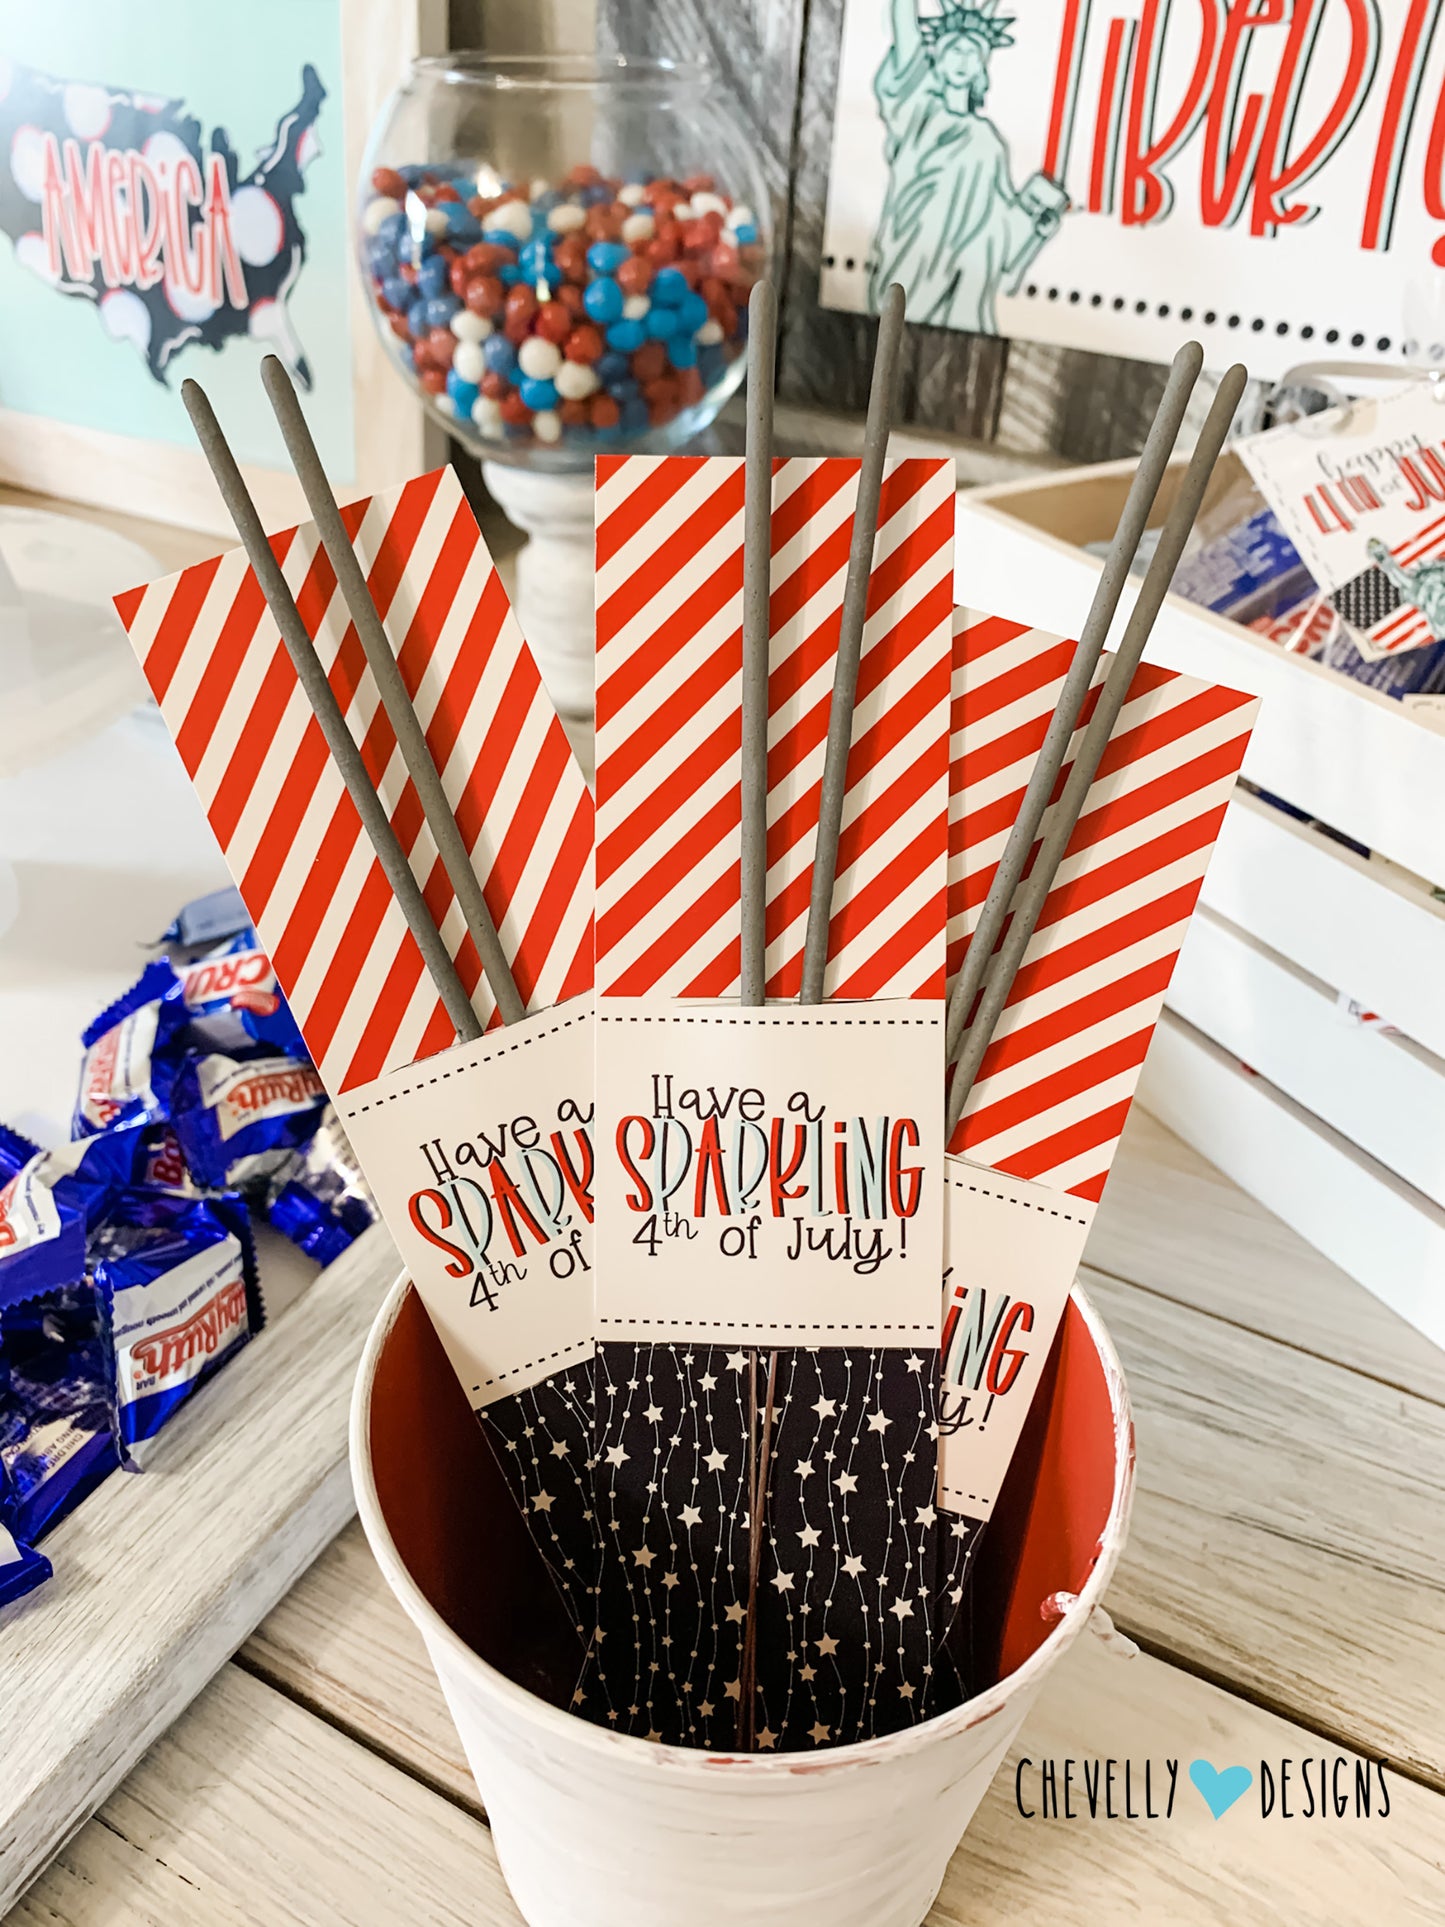 The America Printable Party Decoration Kit for the 4th of July | Instant Digital Download